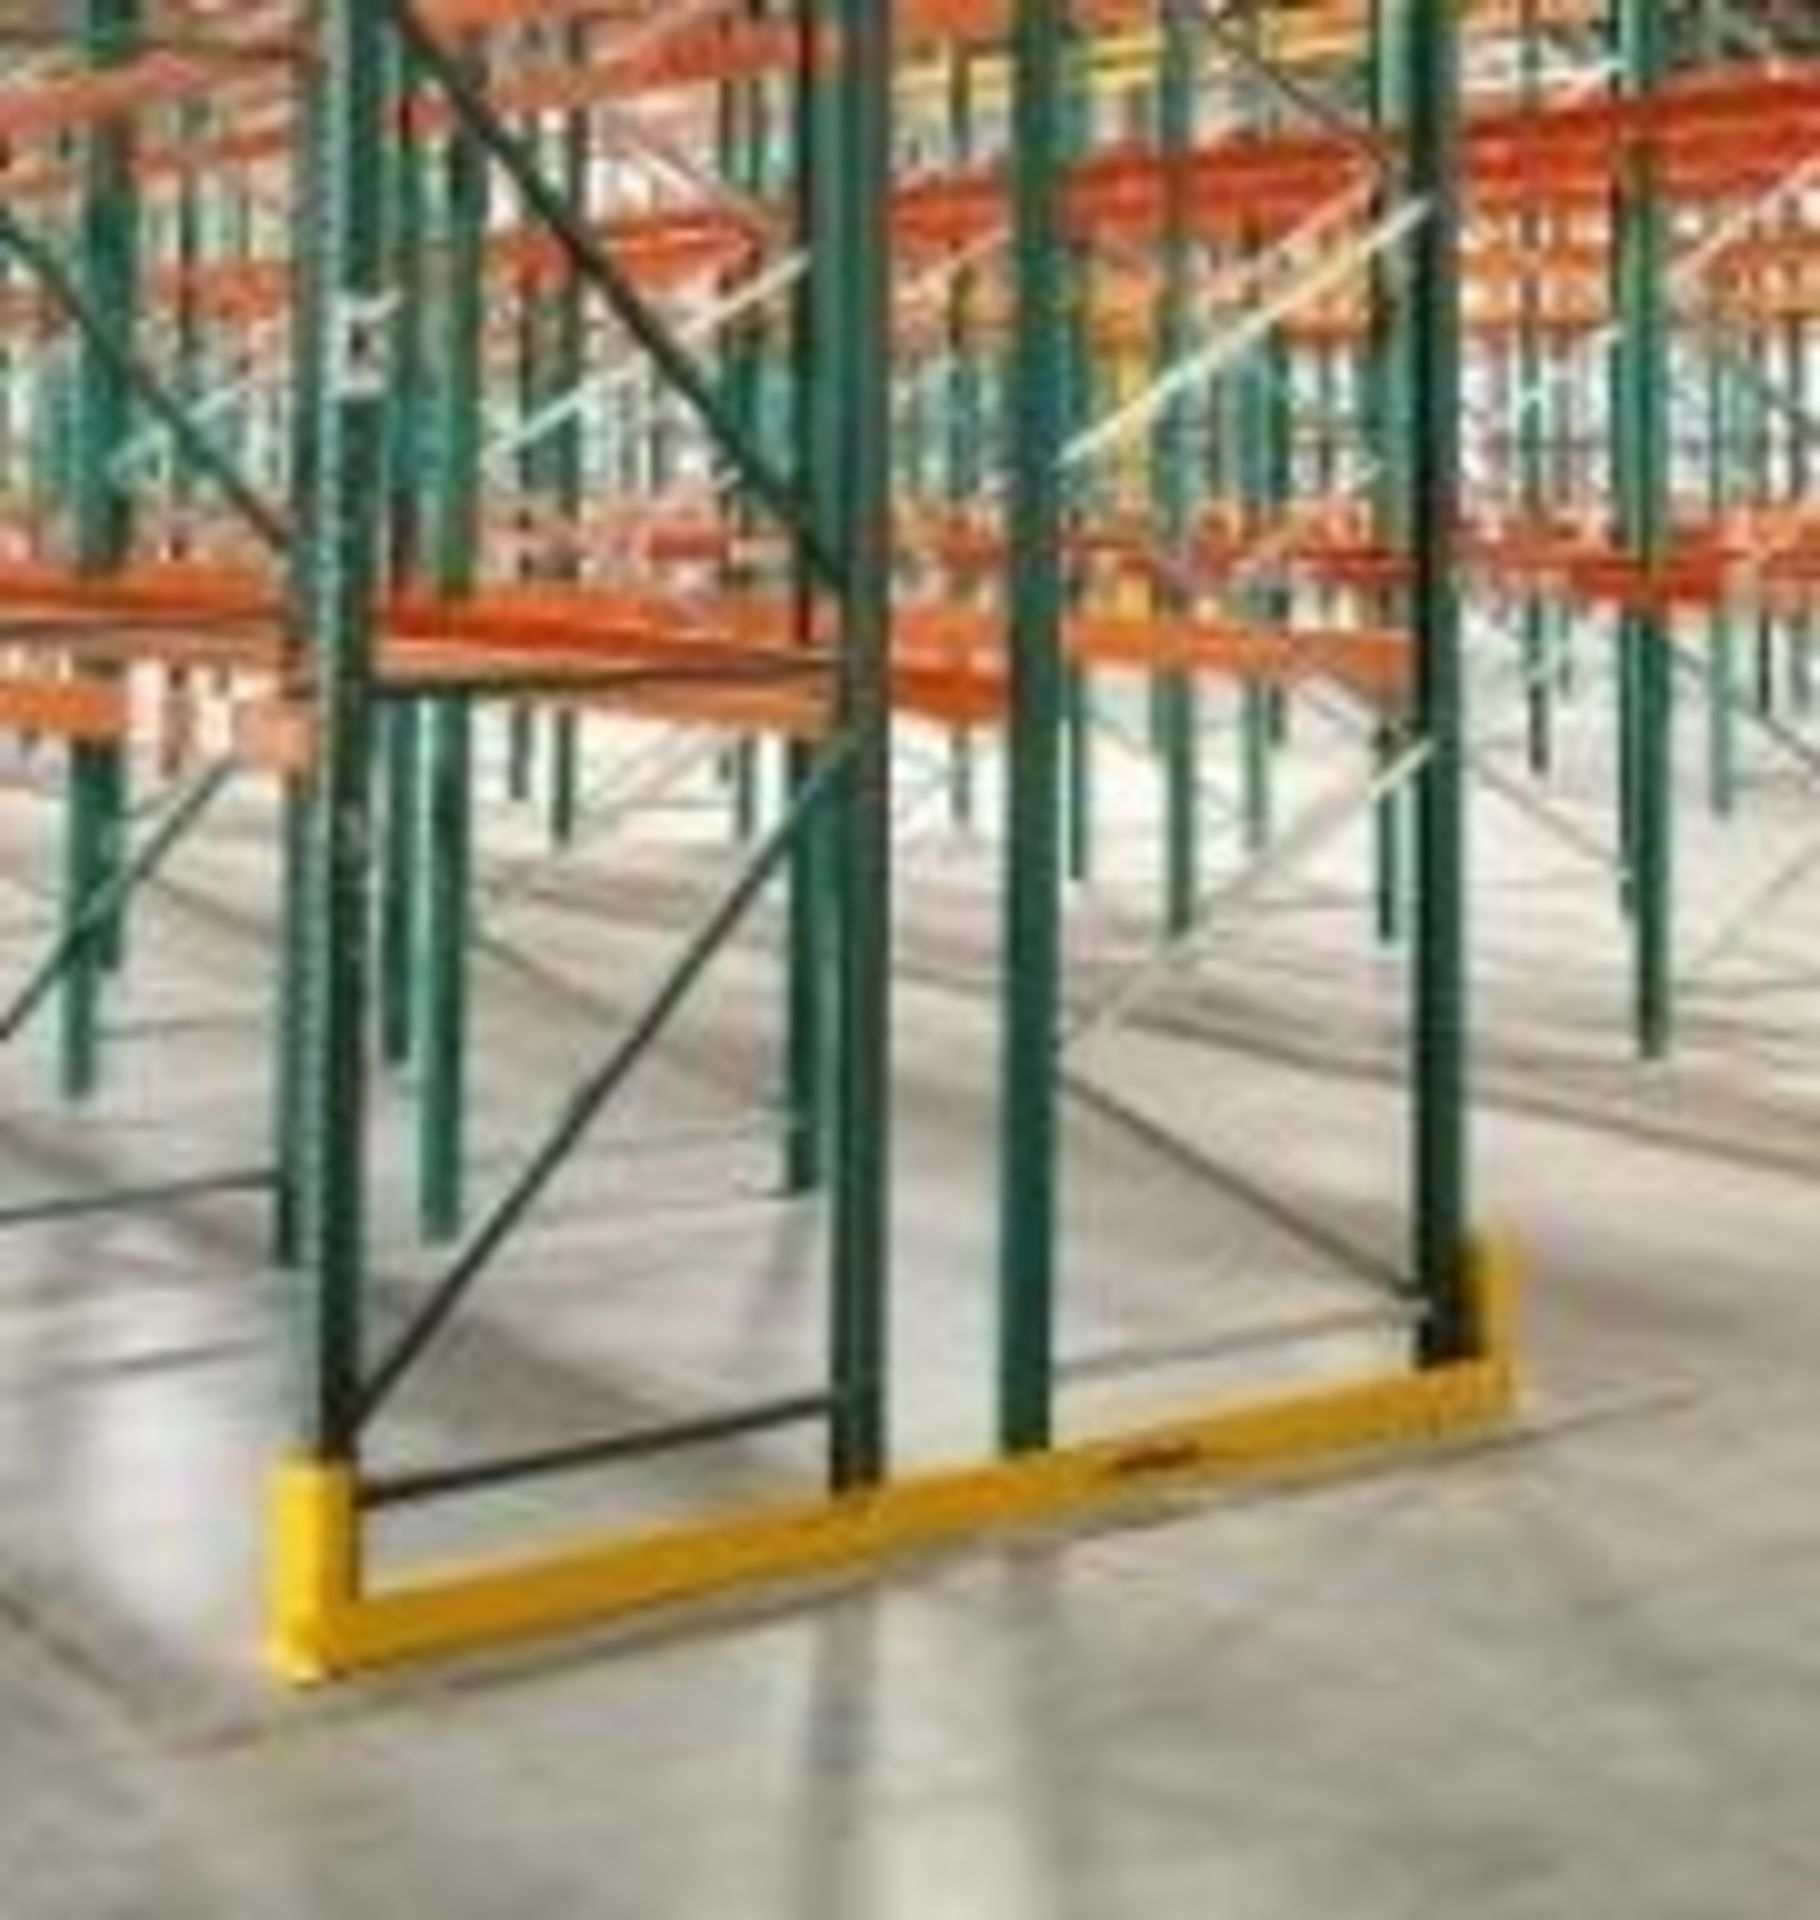 96" DOUBLE ENDED END OF AISLE RACK PROTECTOERS - Image 2 of 2